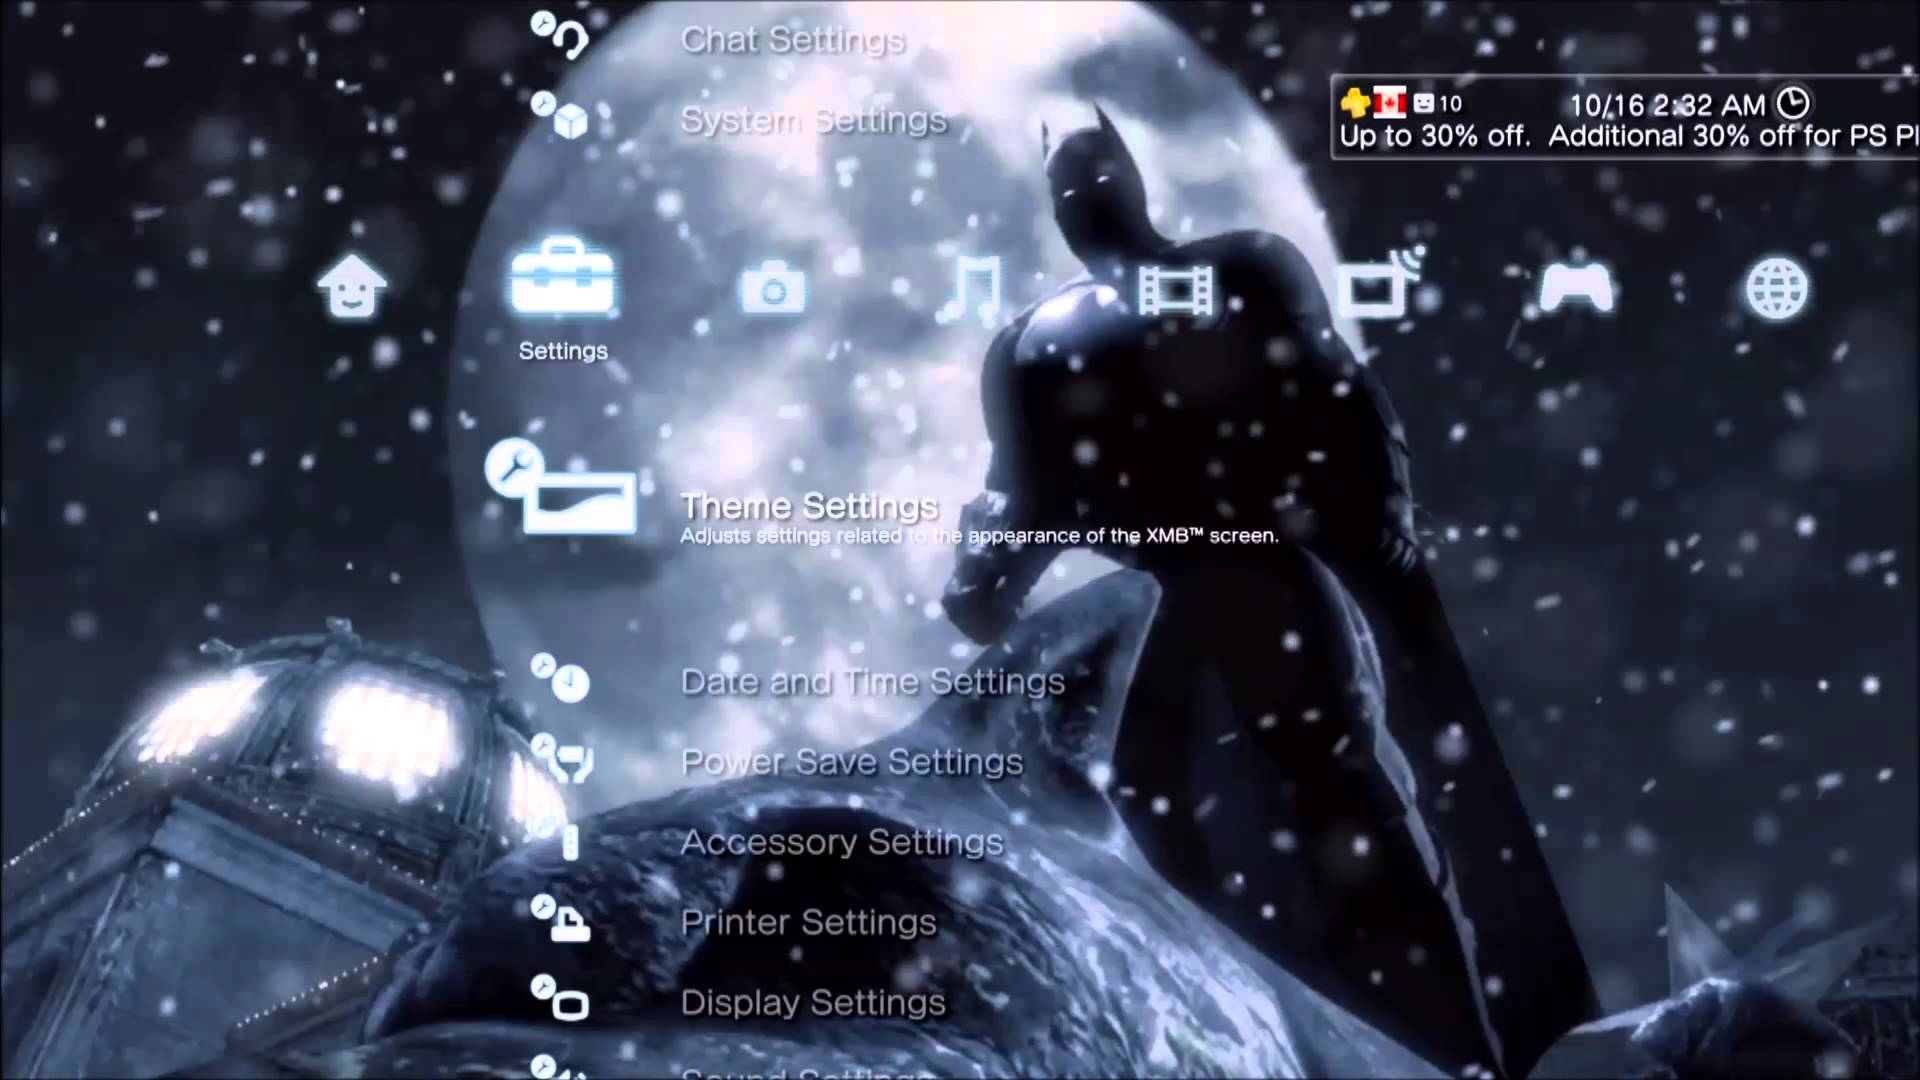 PS3 Wallpaper And Themes